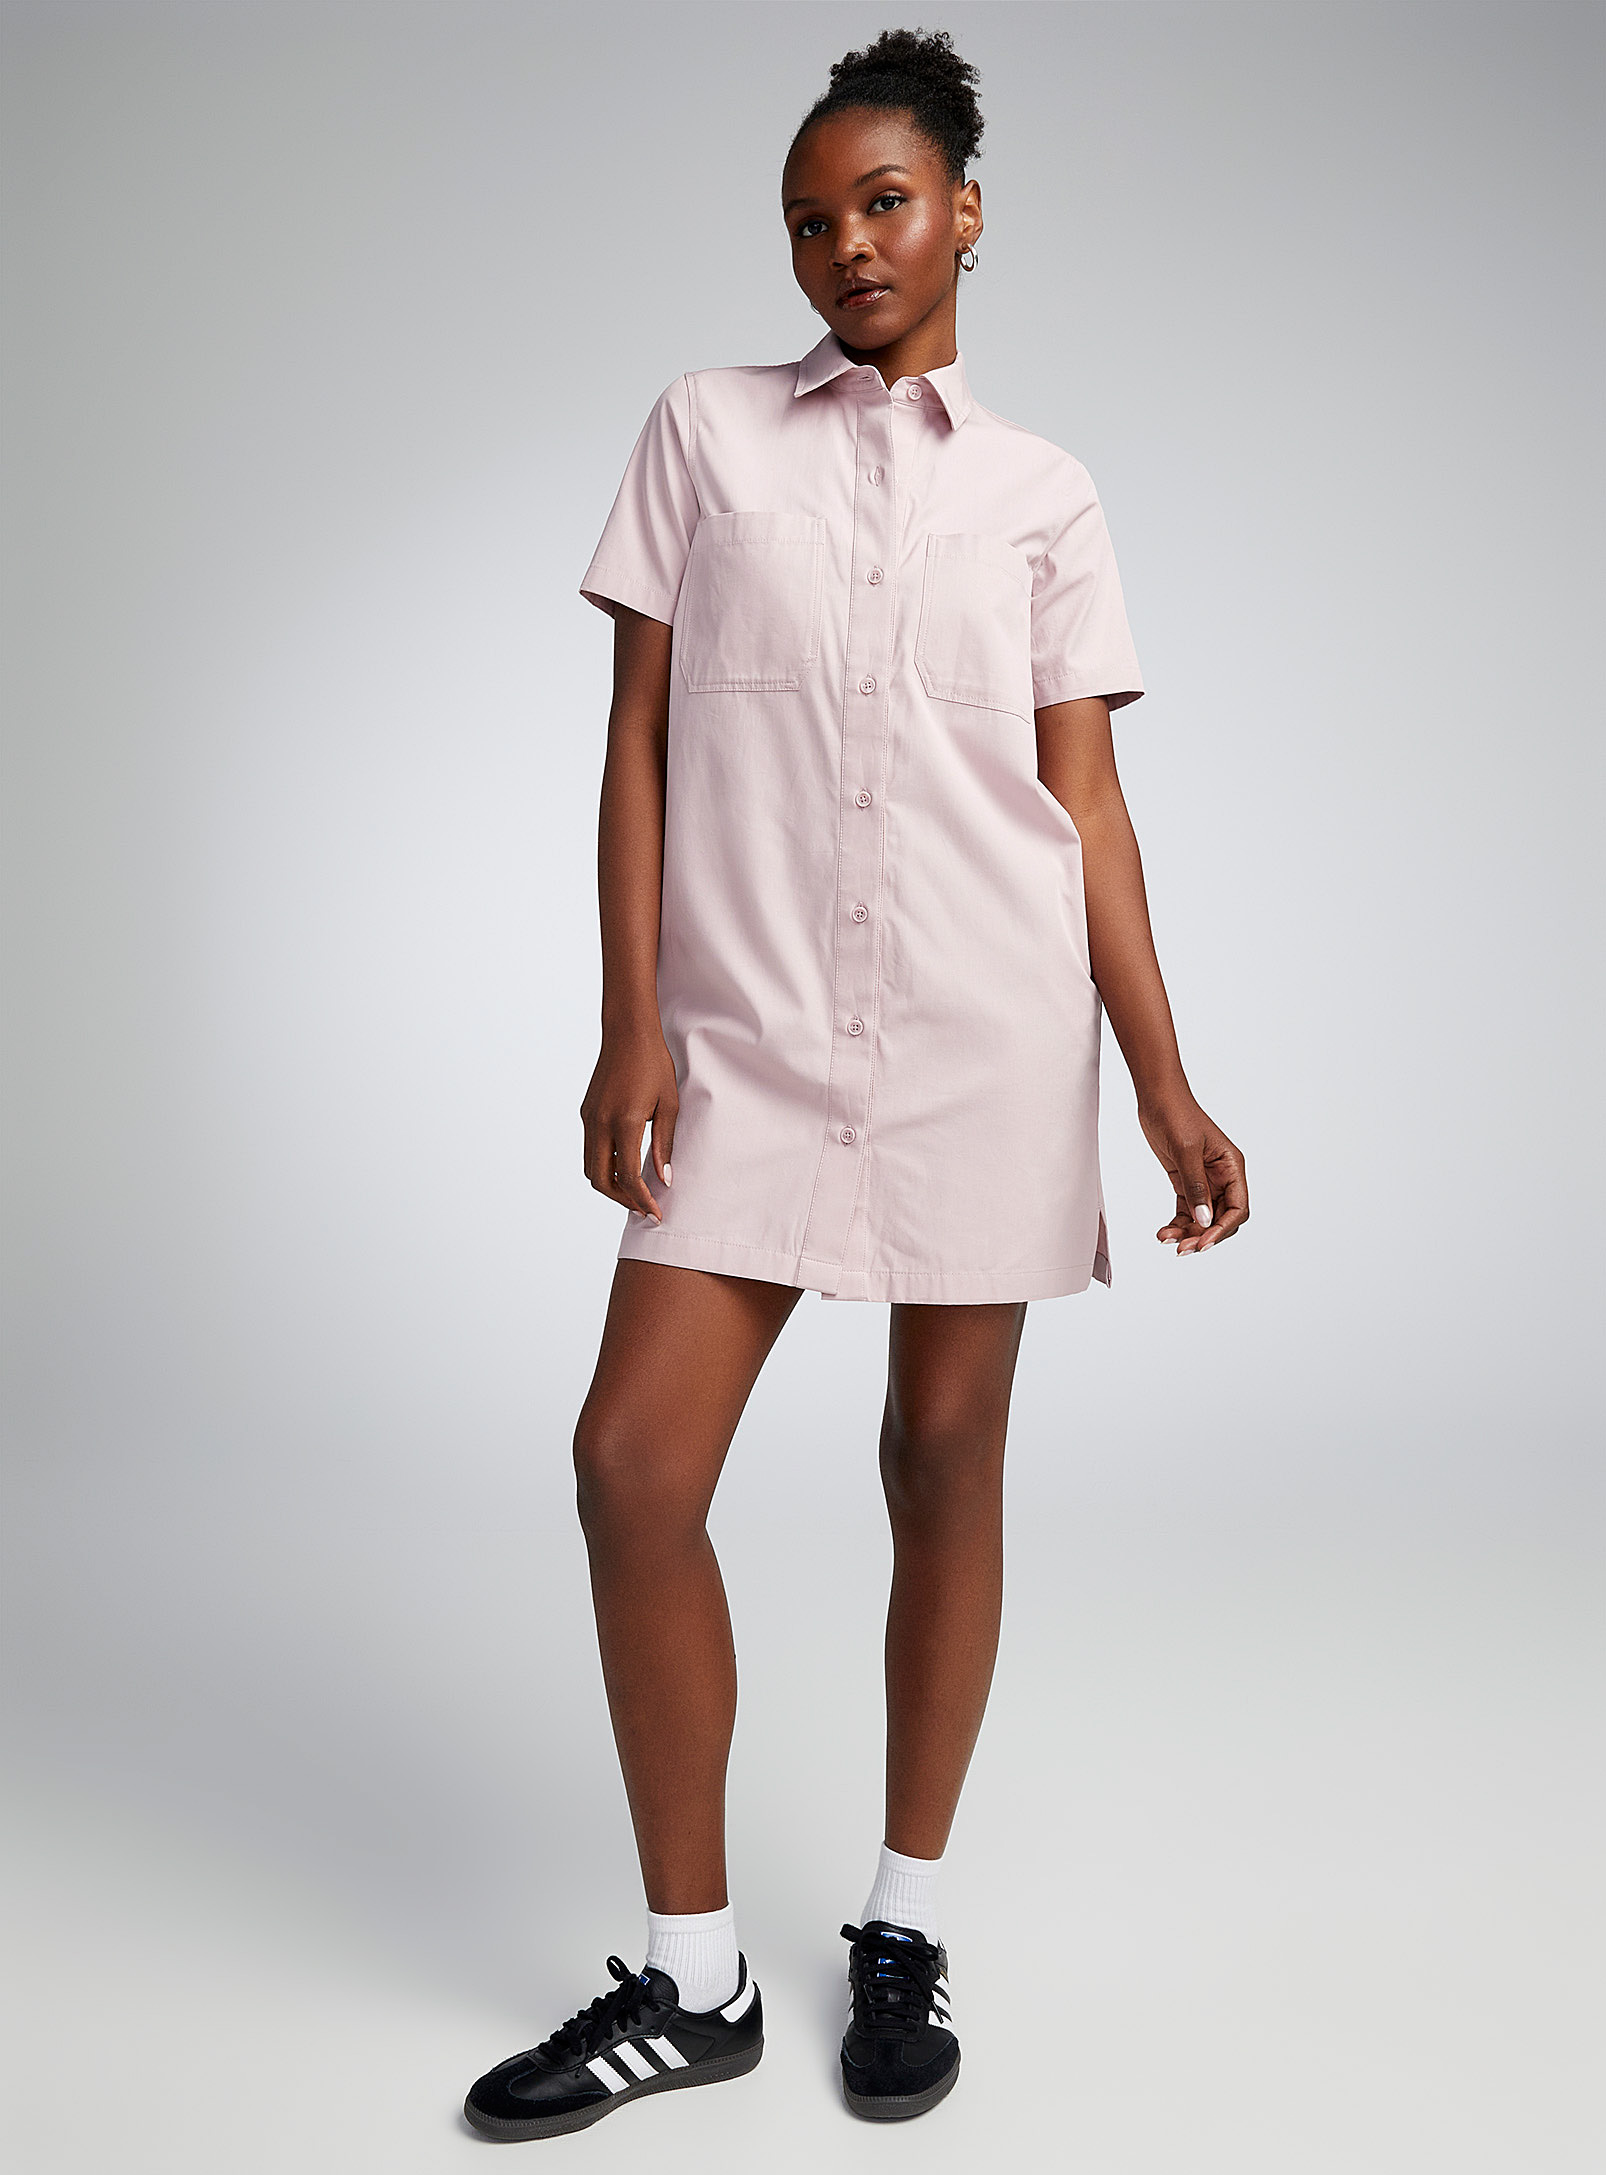 Twik Patch Pockets Colourful Shirtdress In Dusky Pink